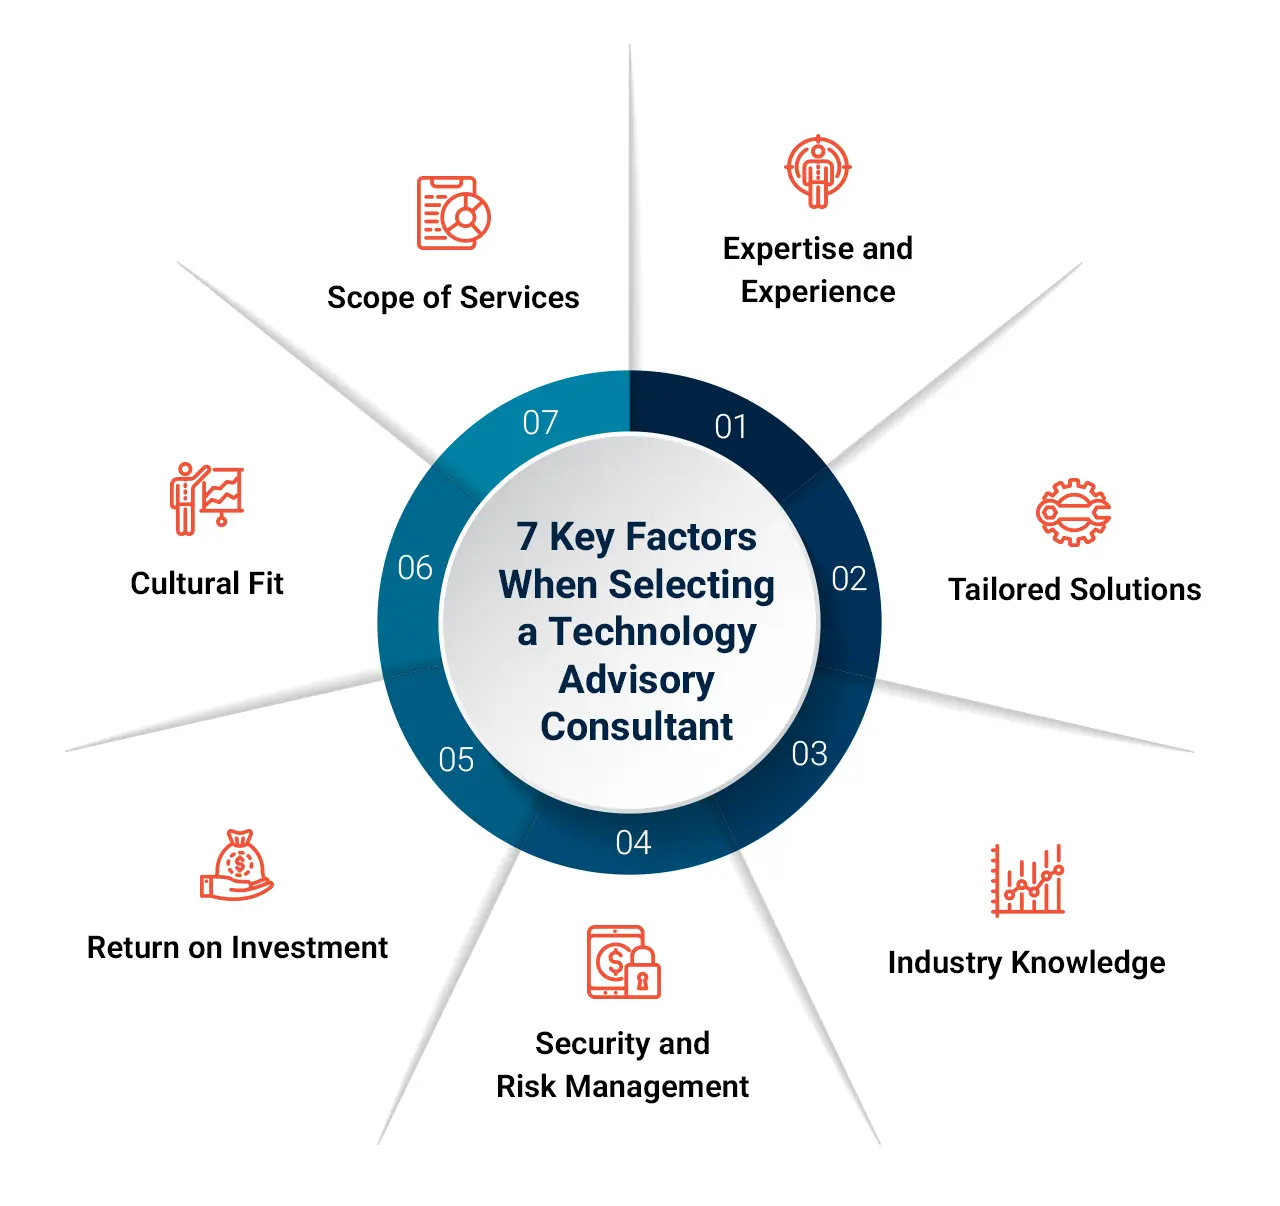 7 Key Factors When Selecting a Technology Advisory Consultant